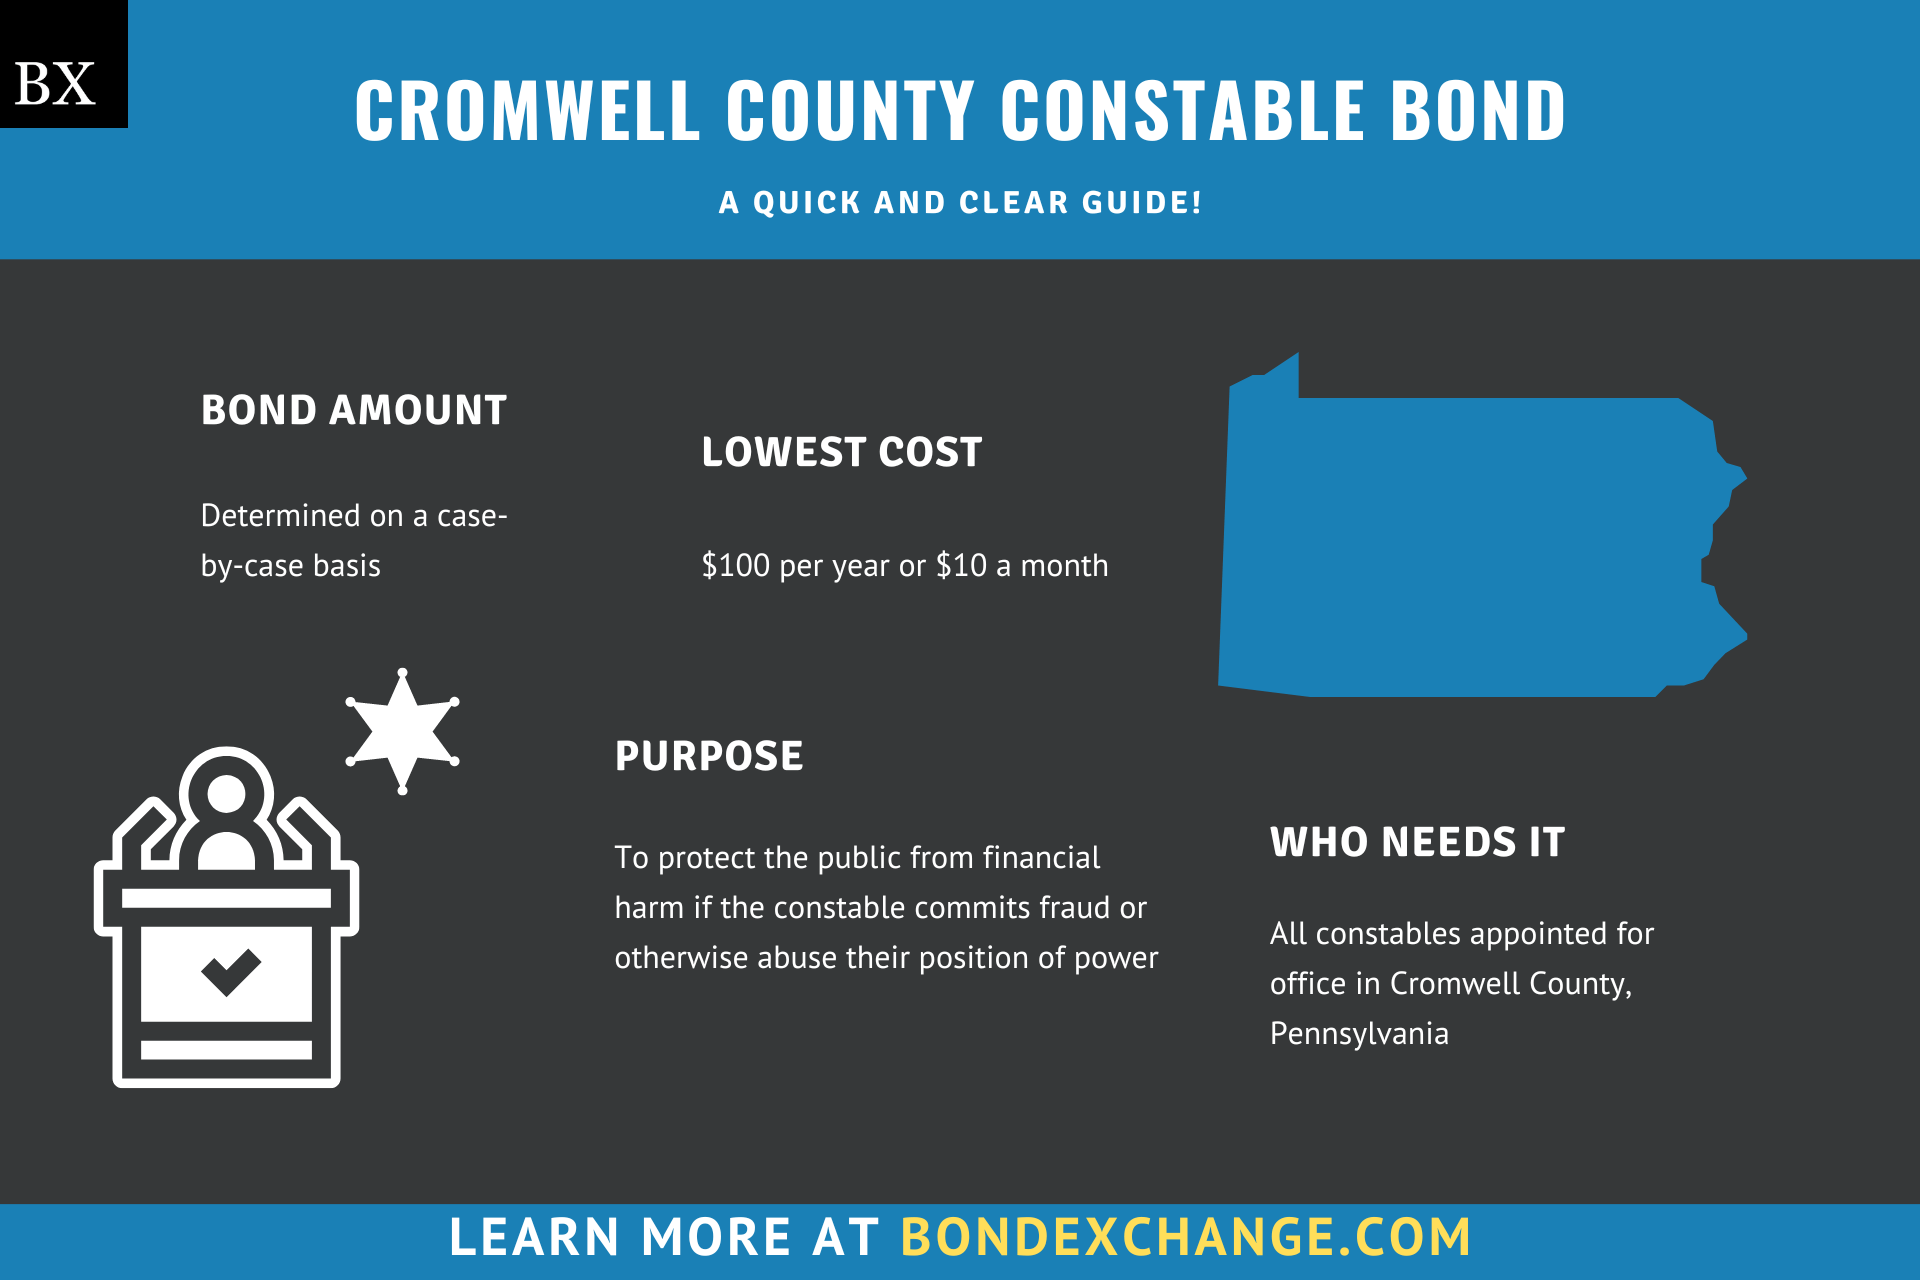 Cromwell County Constable Bond